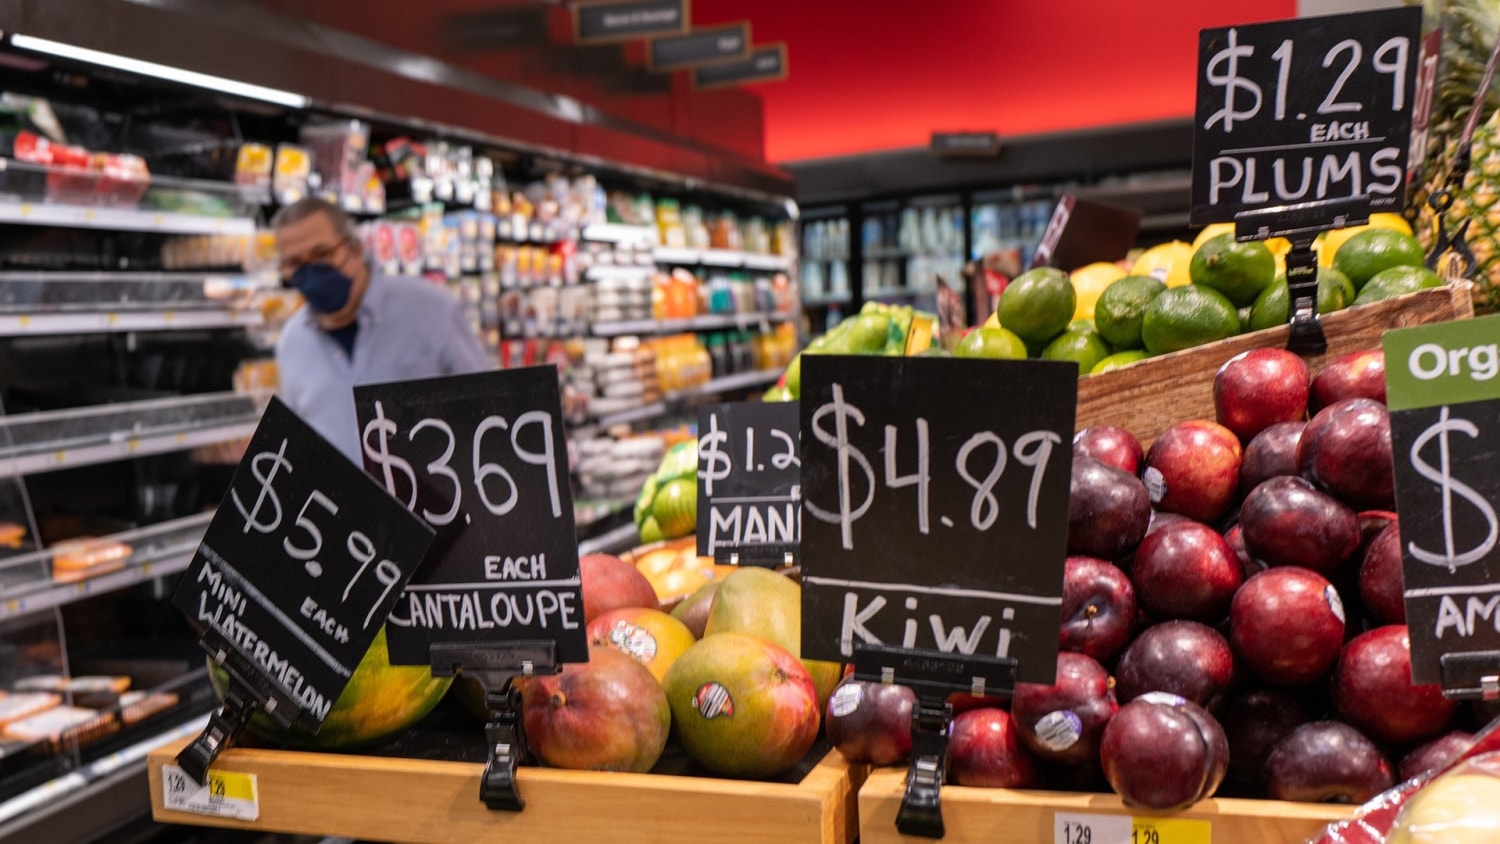 Cut-rate grocery bargains